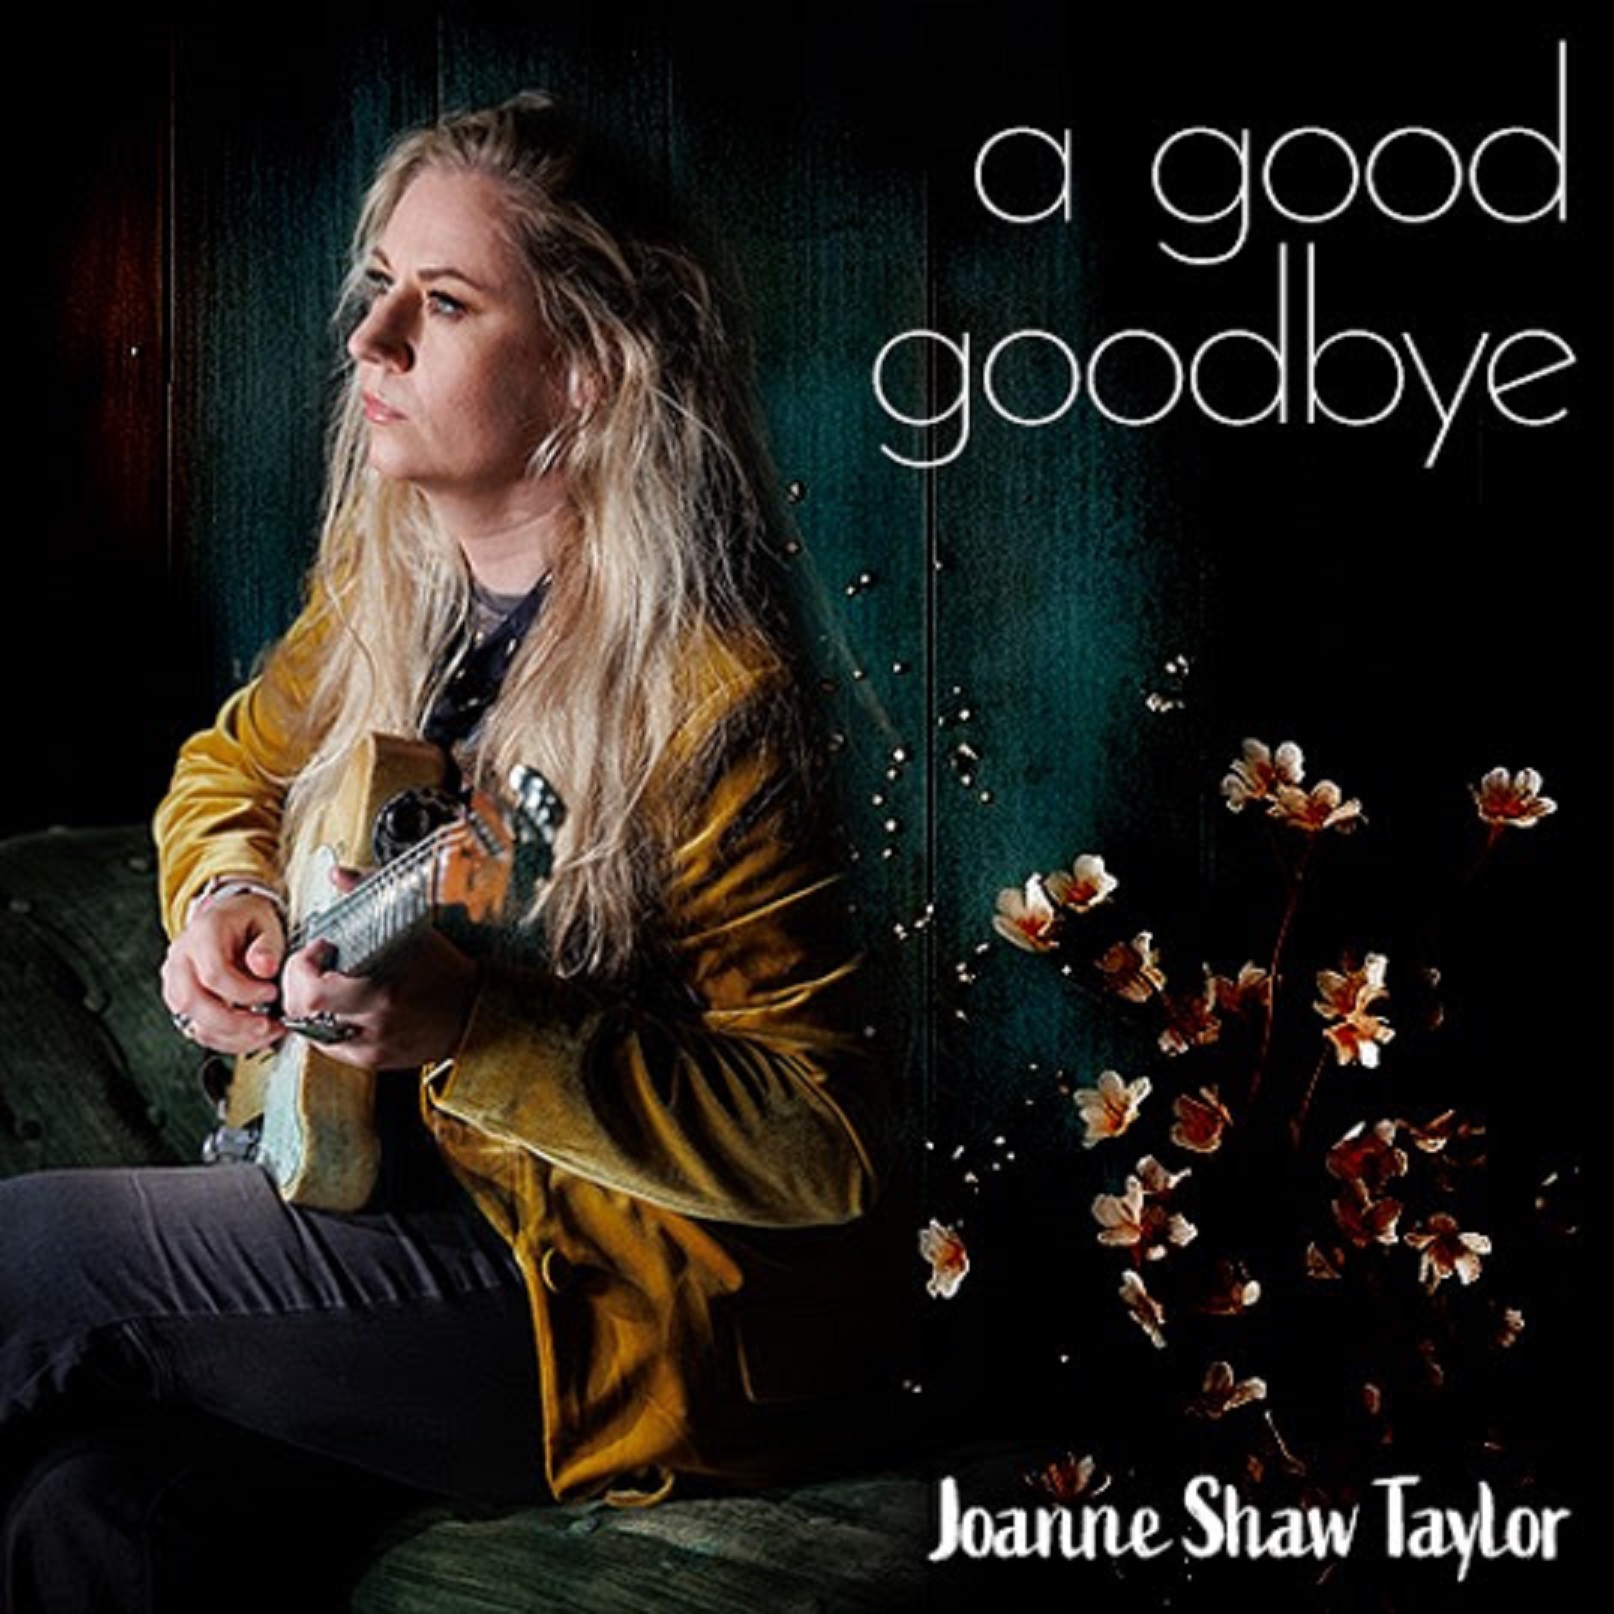 Joanne Shaw Taylor’s "A Good Goodbye" Showcases Emotive Vocals and Rich Guitar Playing